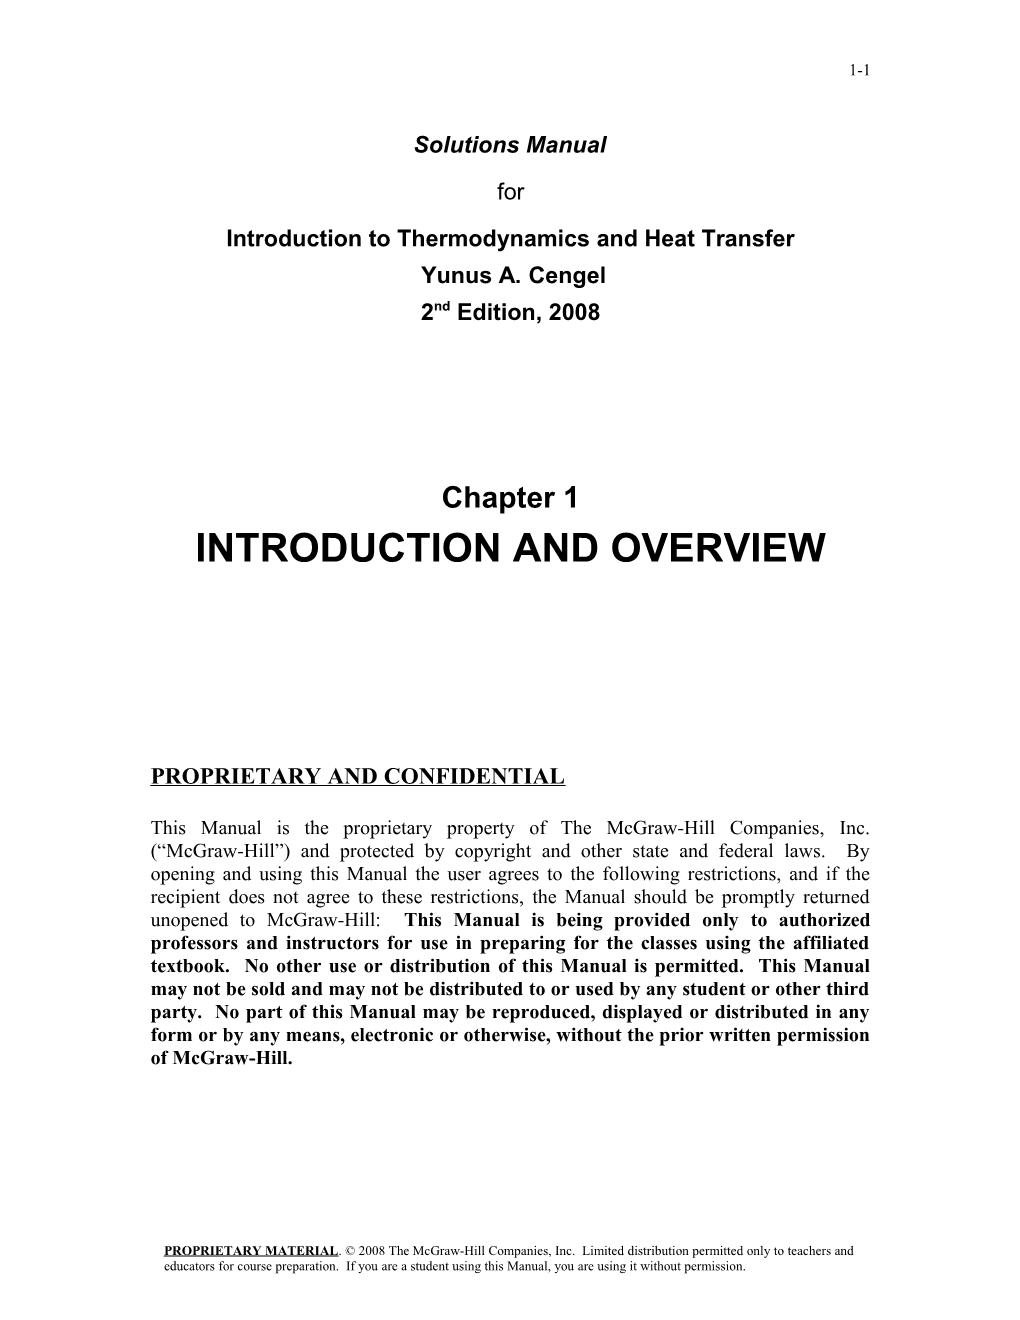 Introduction to Thermodynamics and Heat Transfer